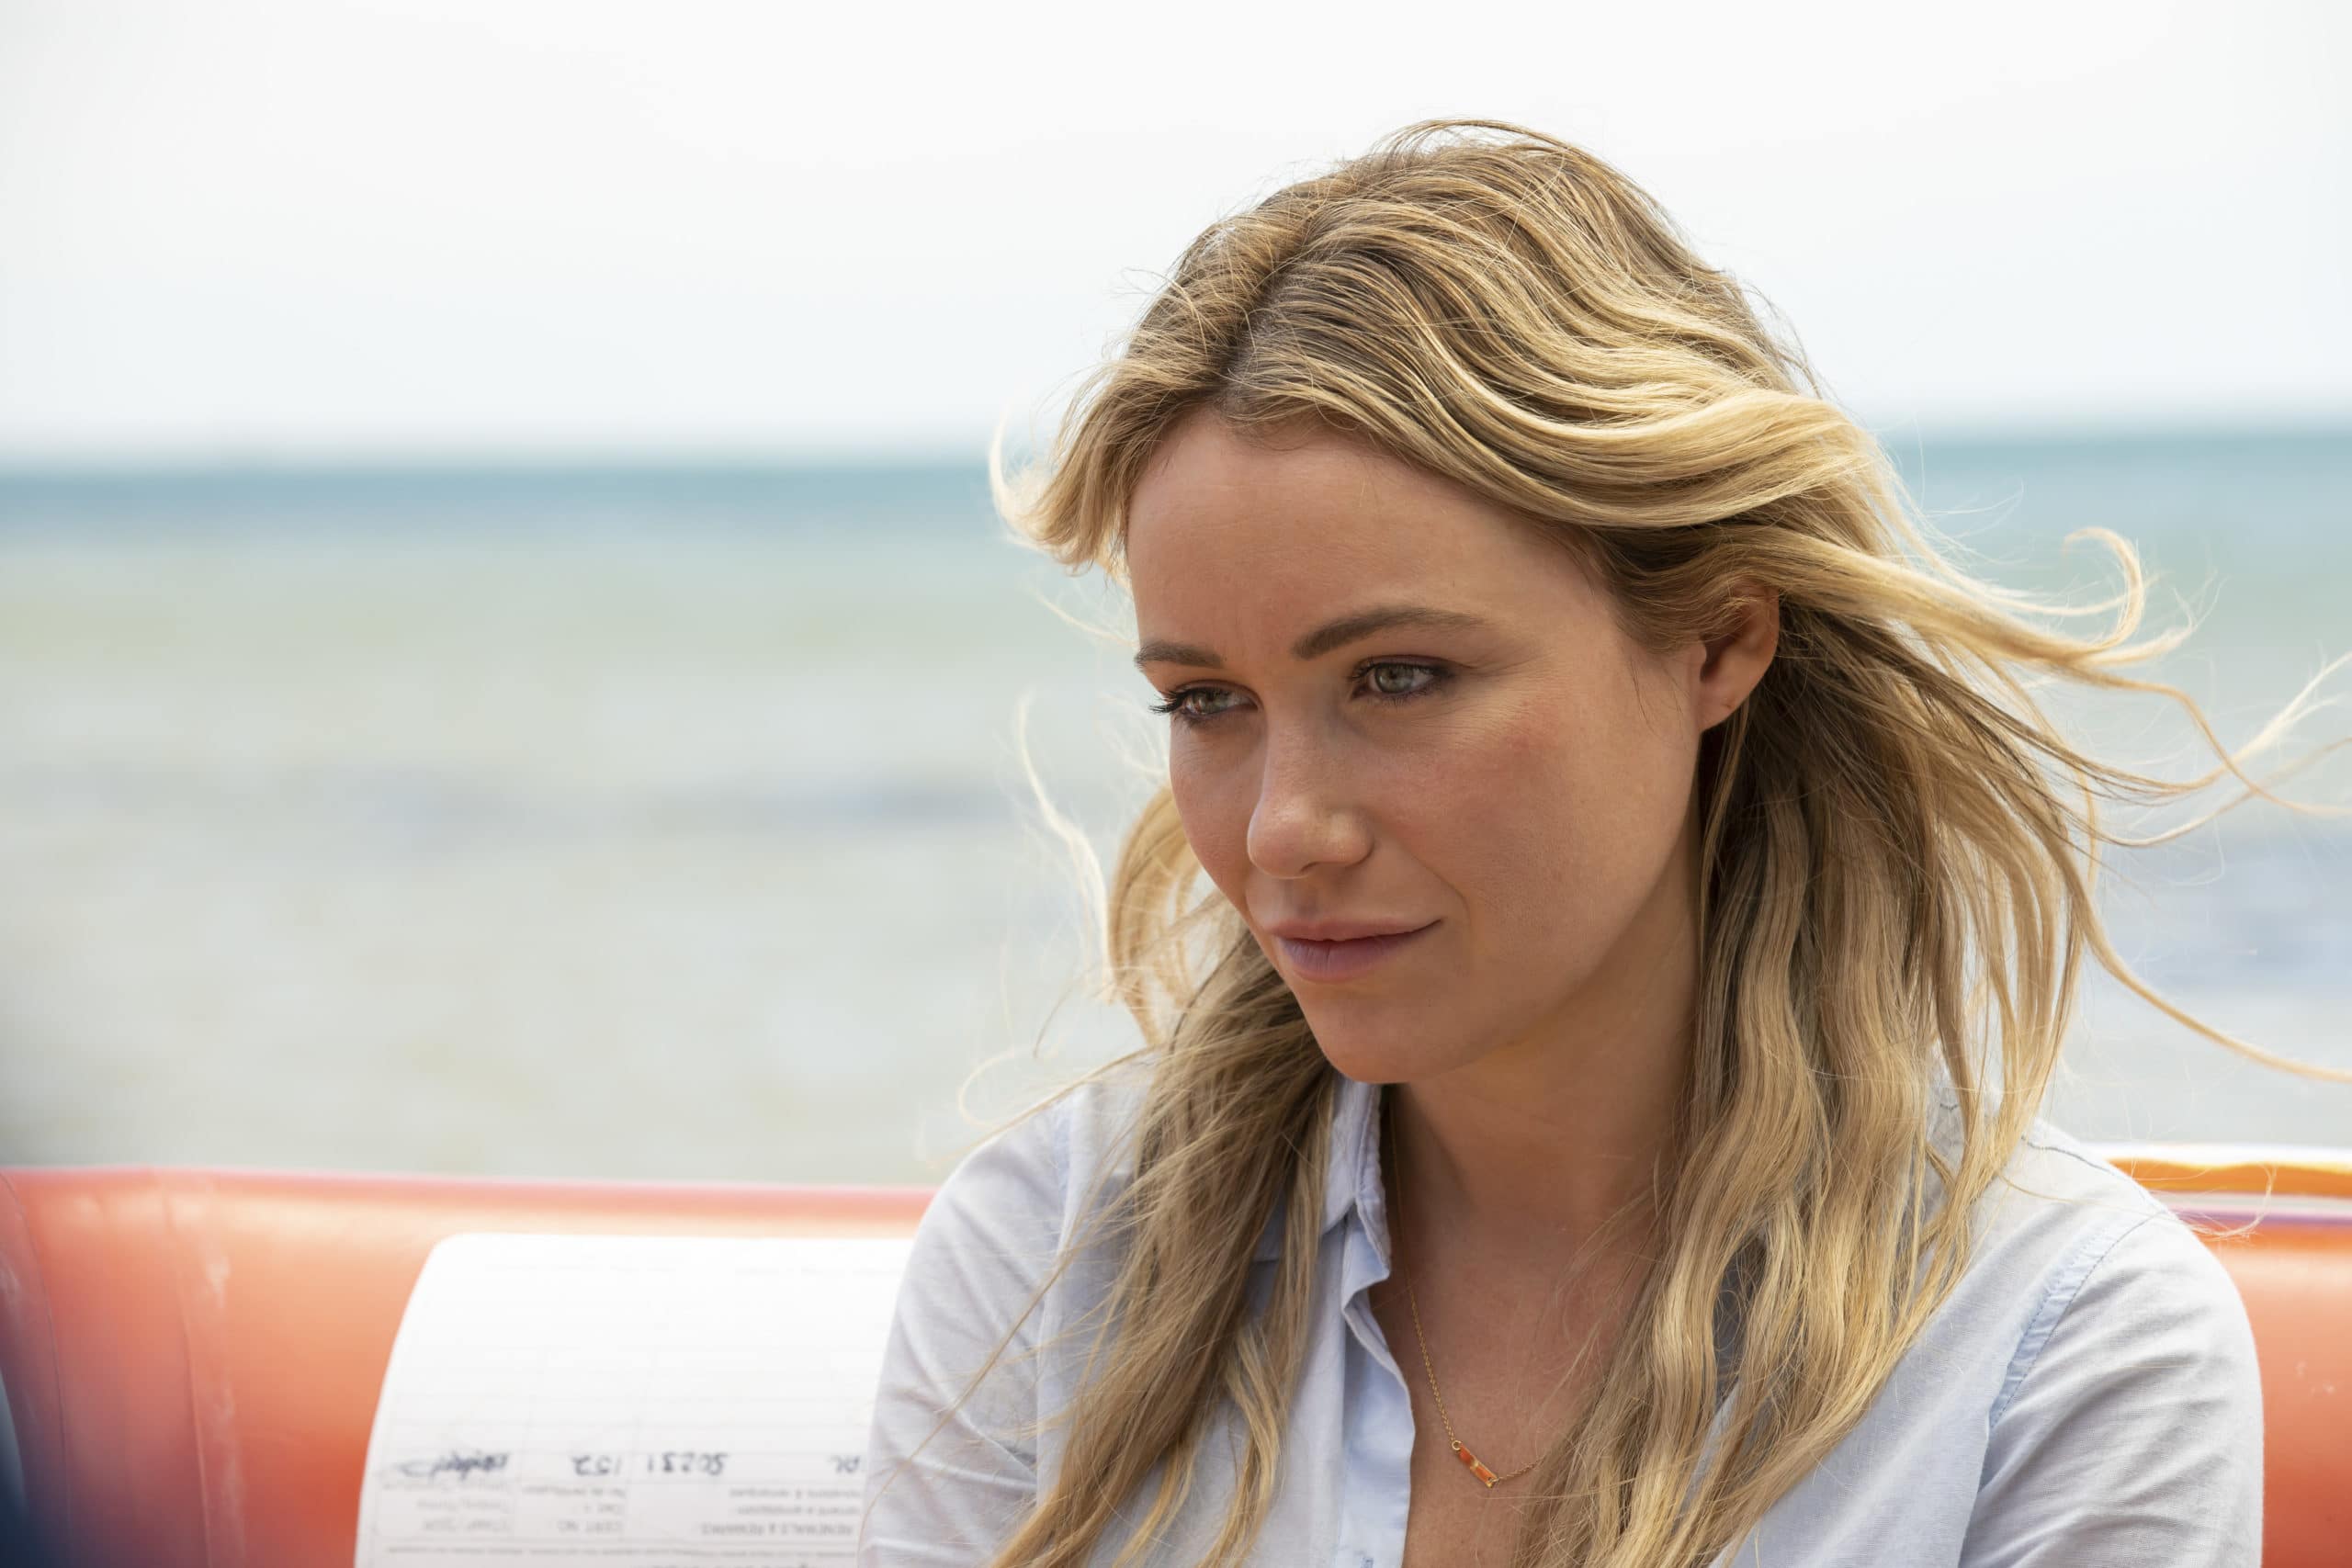 Katrina Bowden as Kaz in the action-adventure/thriller, GREAT WHITE, an RLJE Films and Shudder release. Photo courtesy of RLJE Films and Shudder.